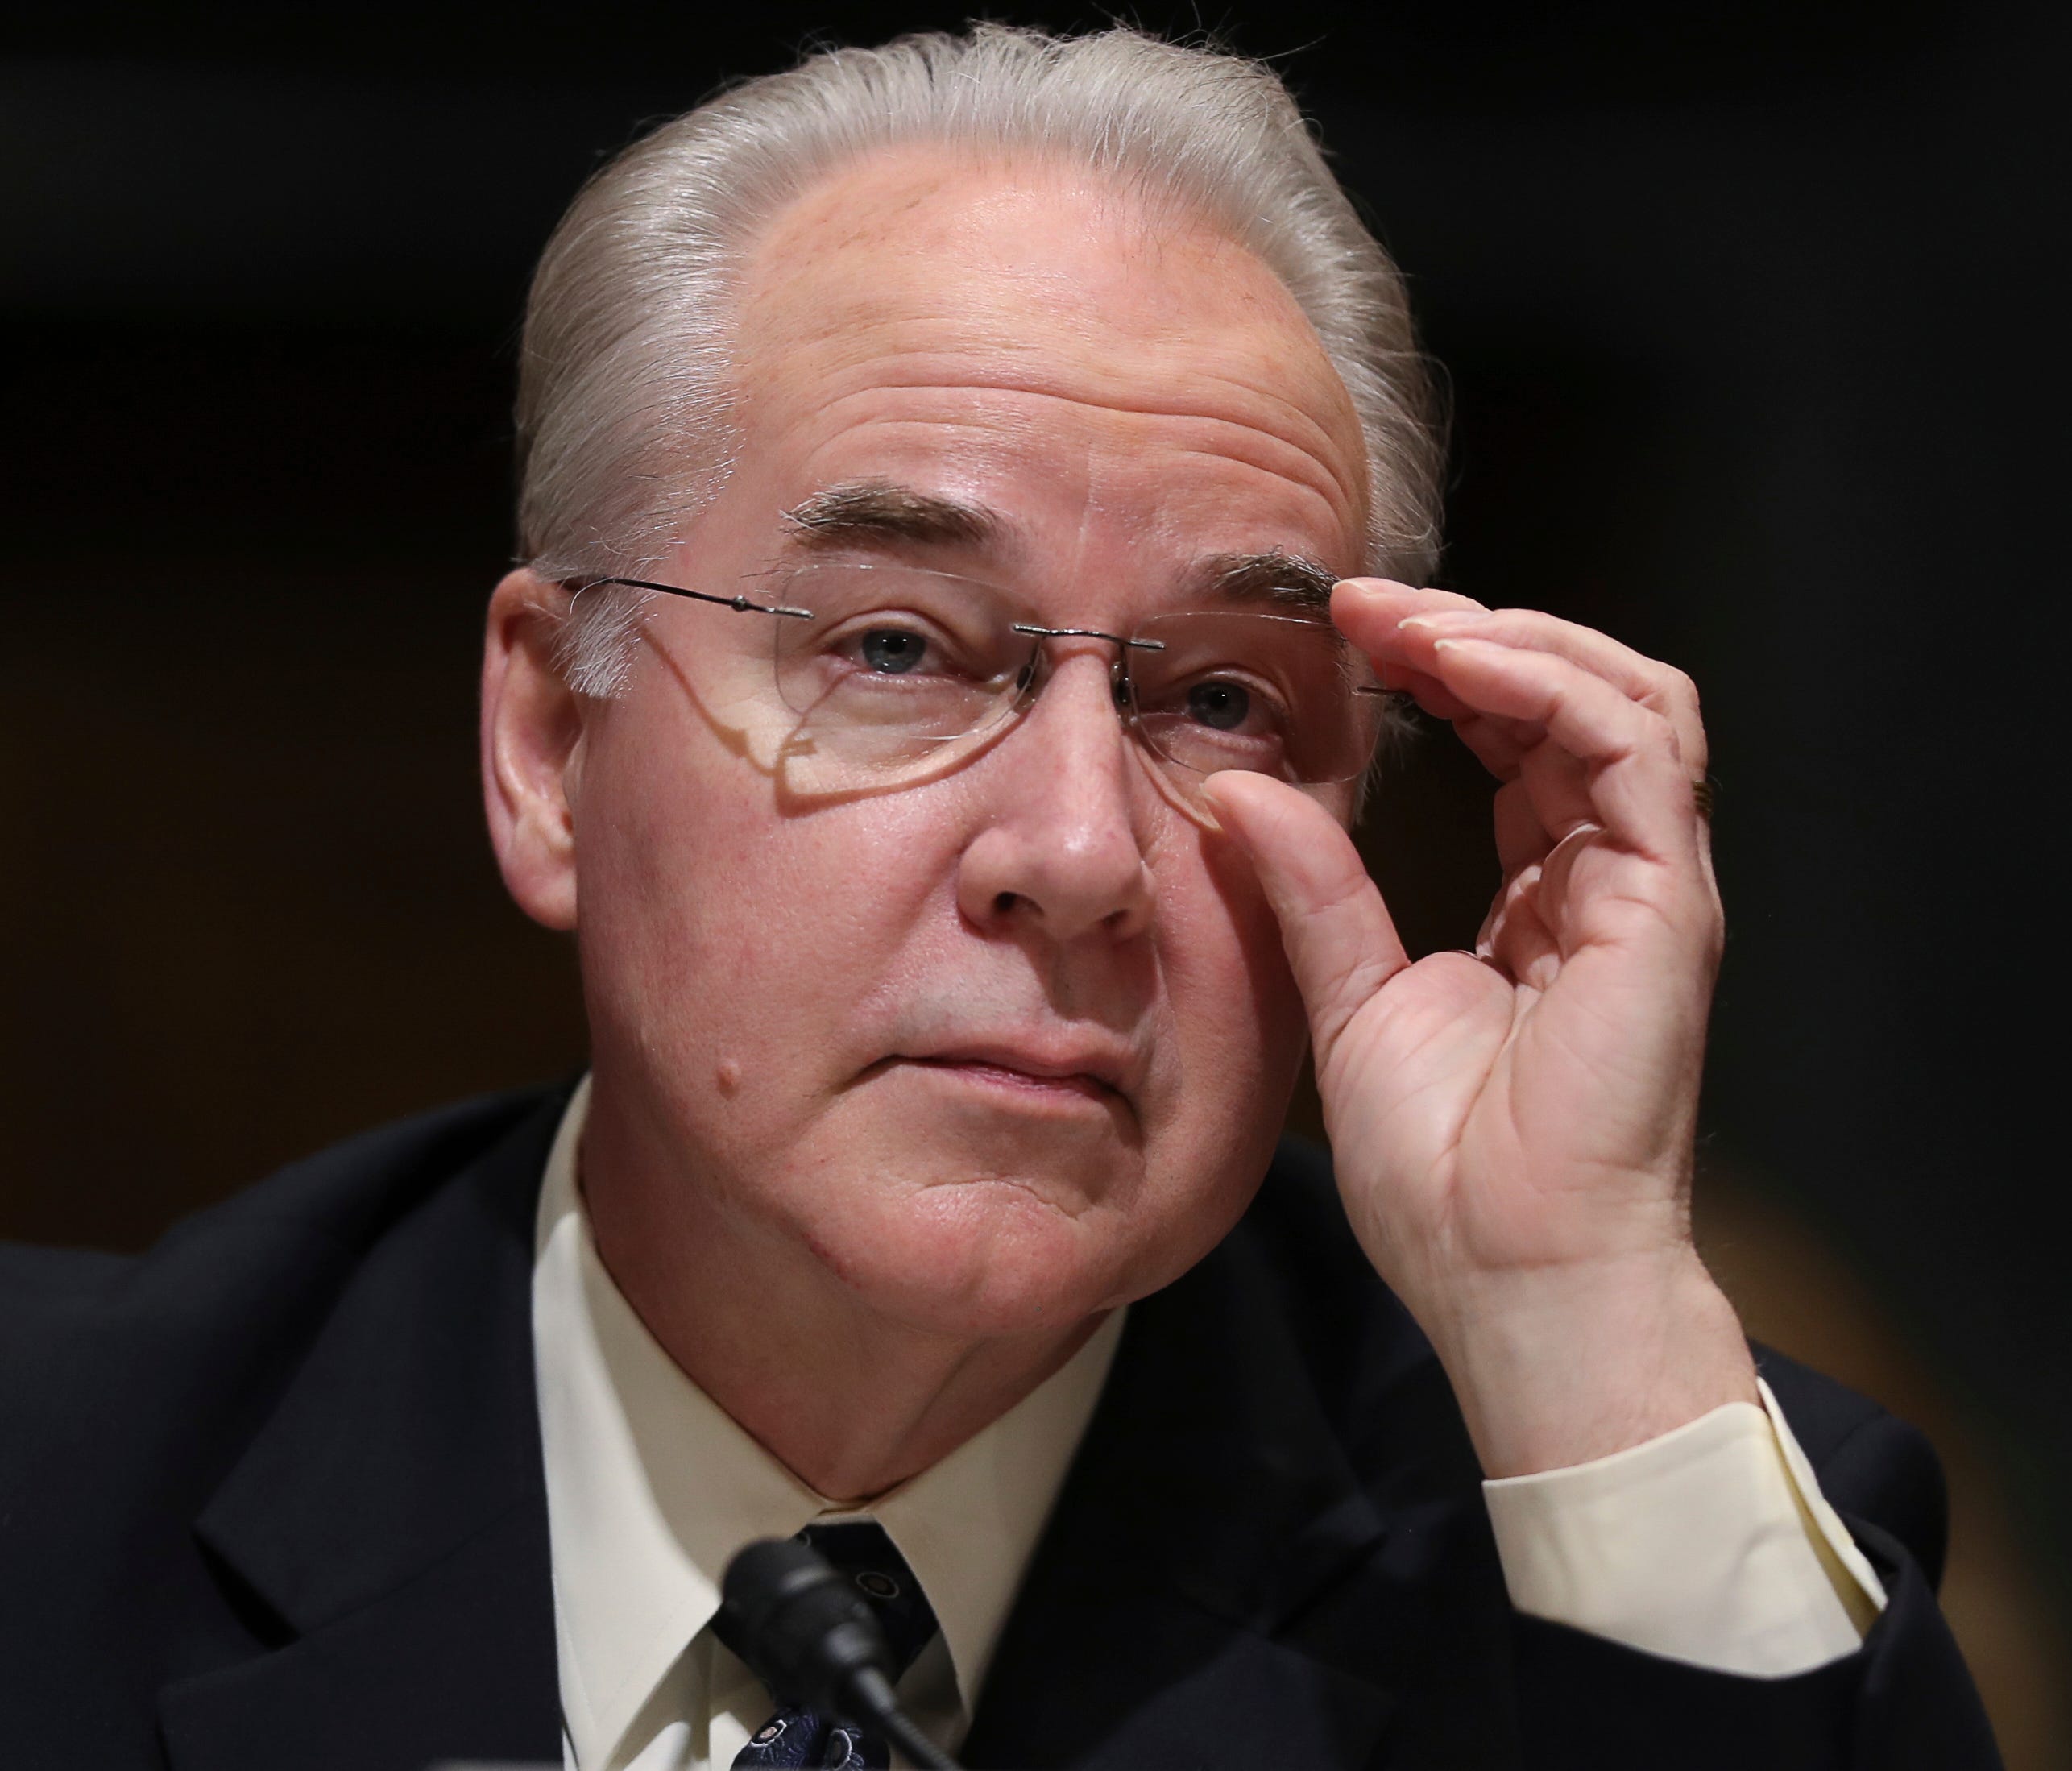 Health and Human Services Secretary-designate, Rep. Tom Price, R-Ga. pauses while testifying on Capitol Hill in Washington at his confirmation hearing before the Senate Finance Committee on January 24, 2017.